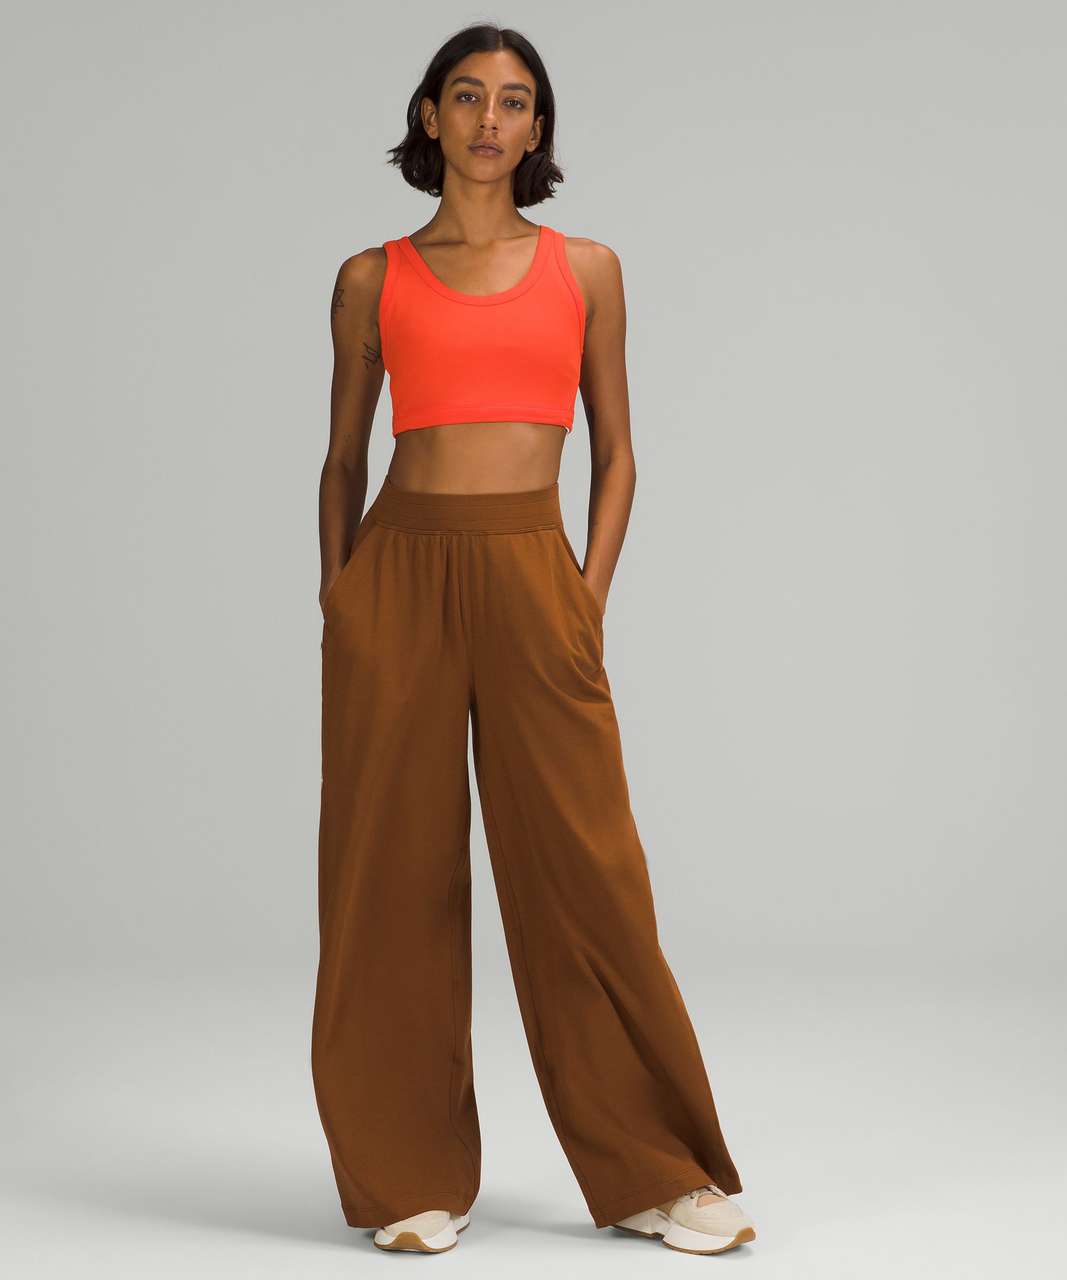 Lululemon Align Wide Leg Pants Brown Size 4 - $40 (59% Off Retail) - From  Brittany